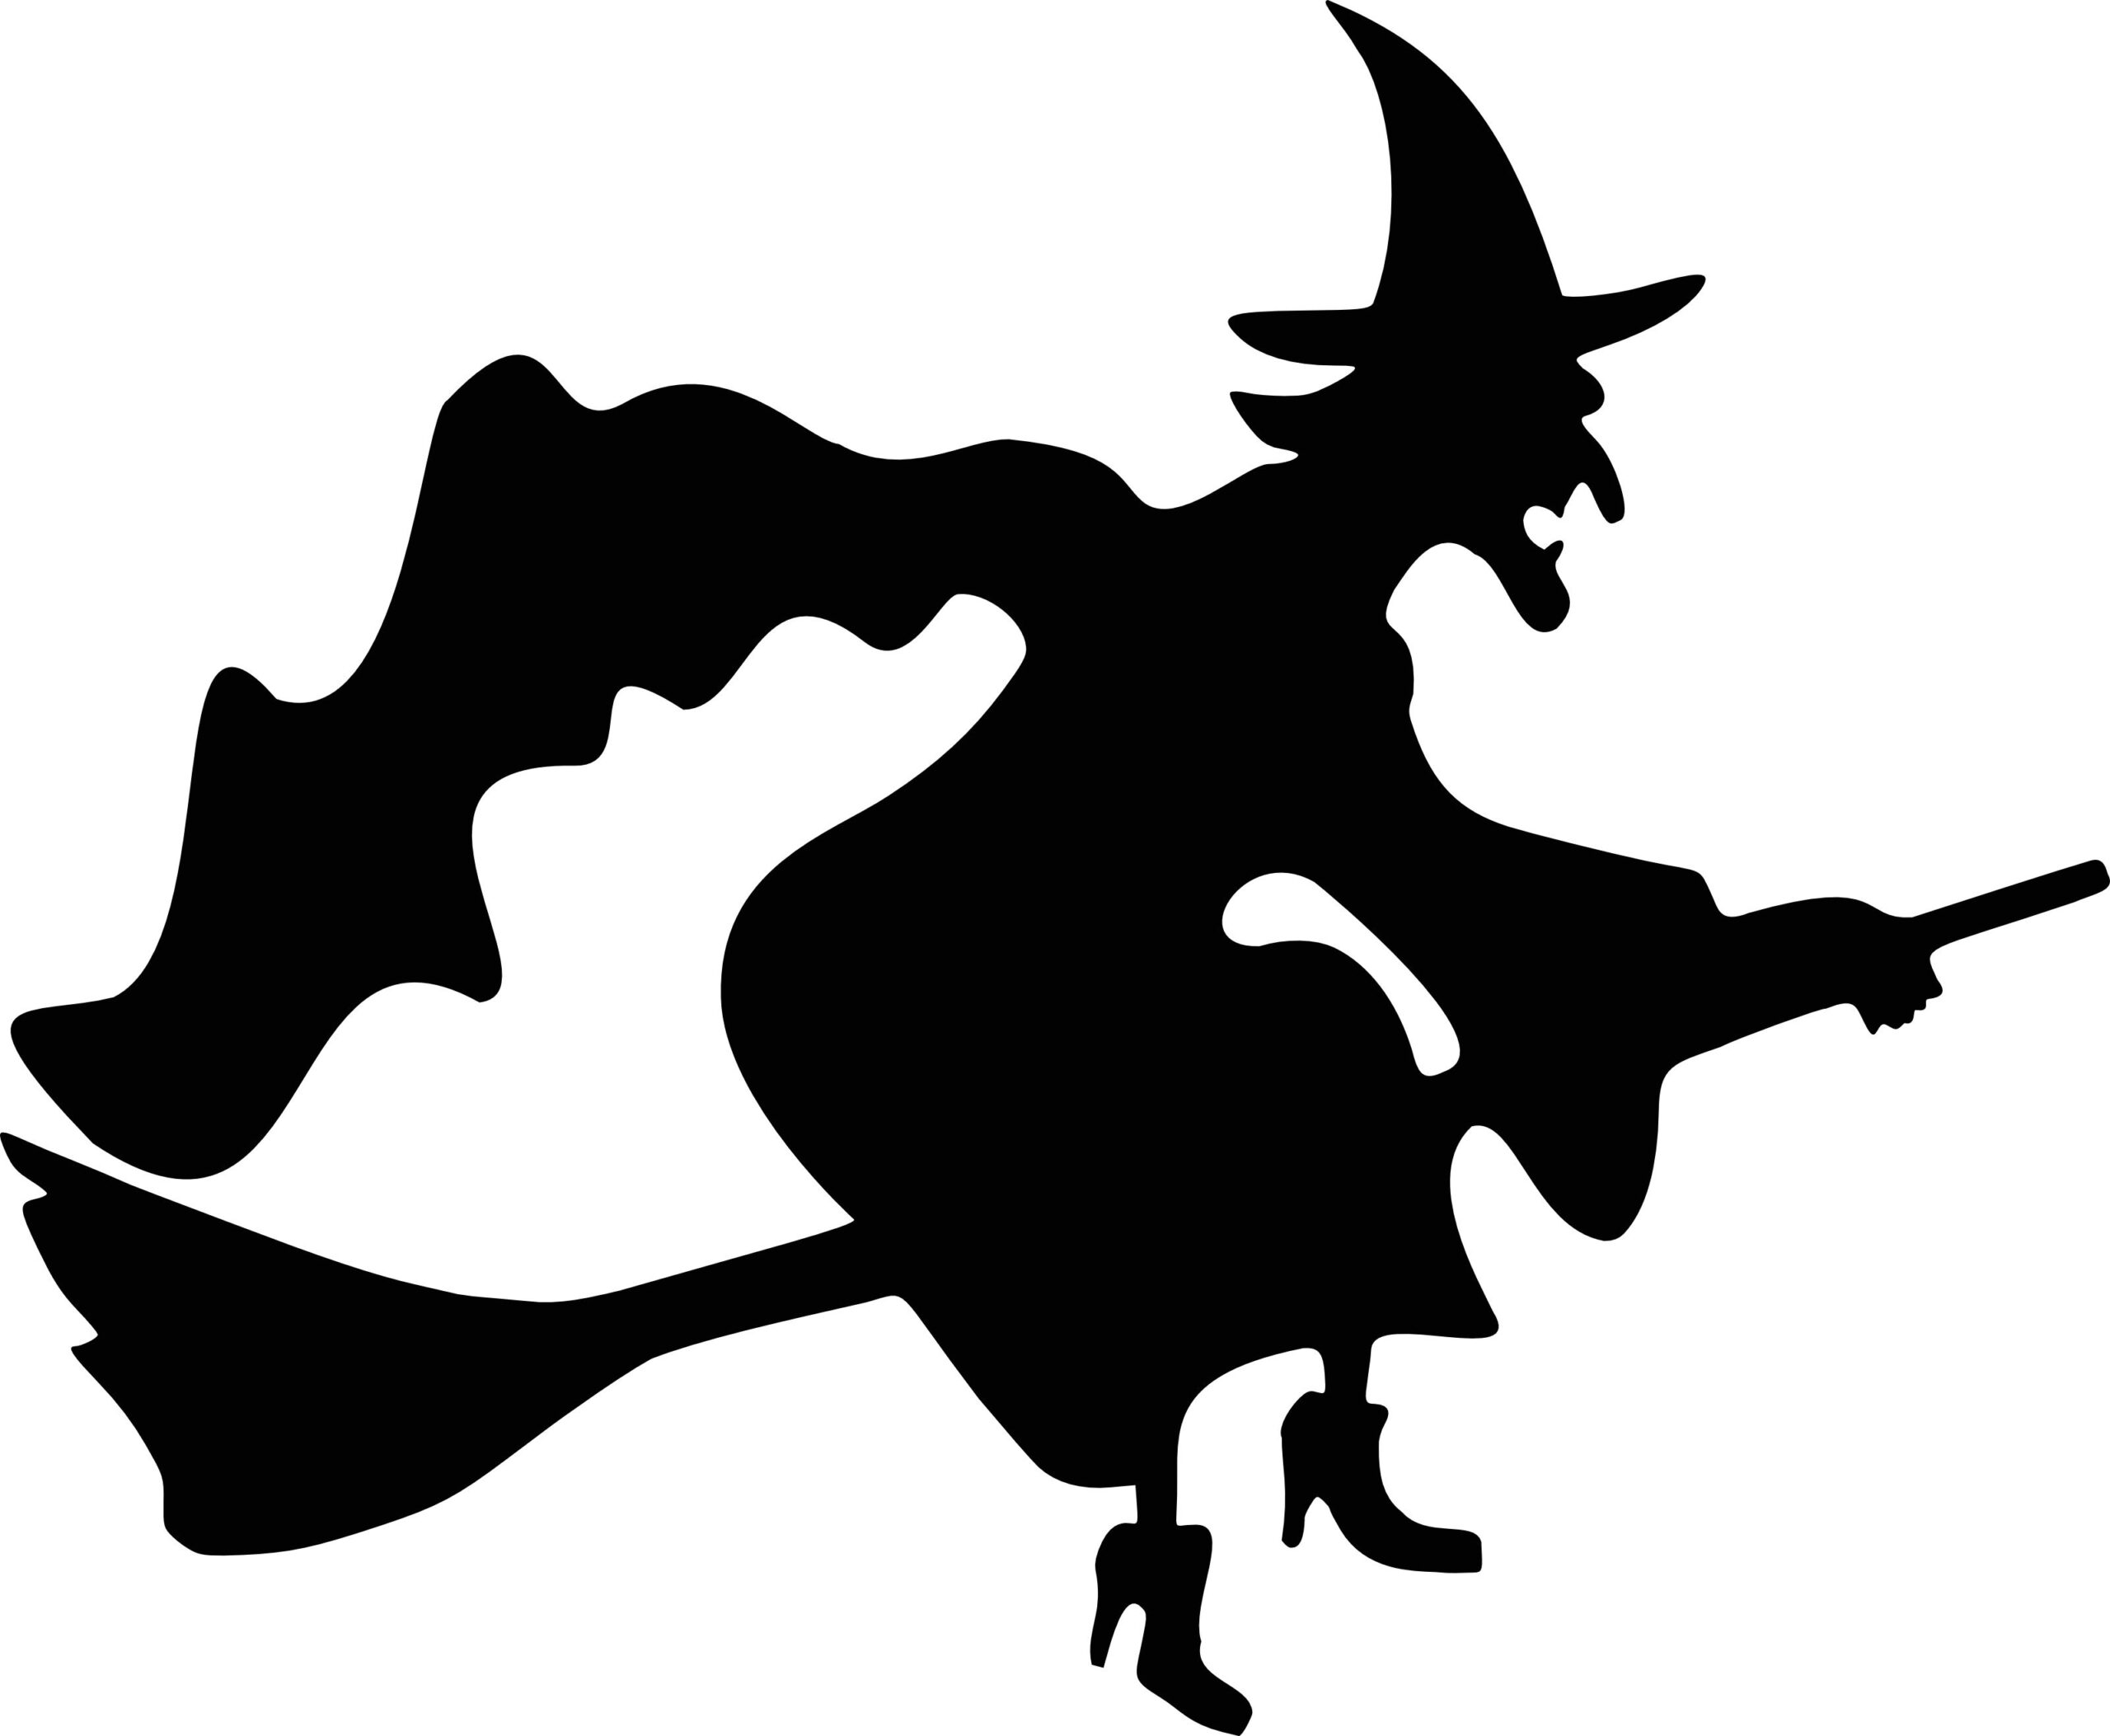 Witch Flying Silhouette - Free Halloween Vector Clipart throughout Free Halloween Silhouette Printables